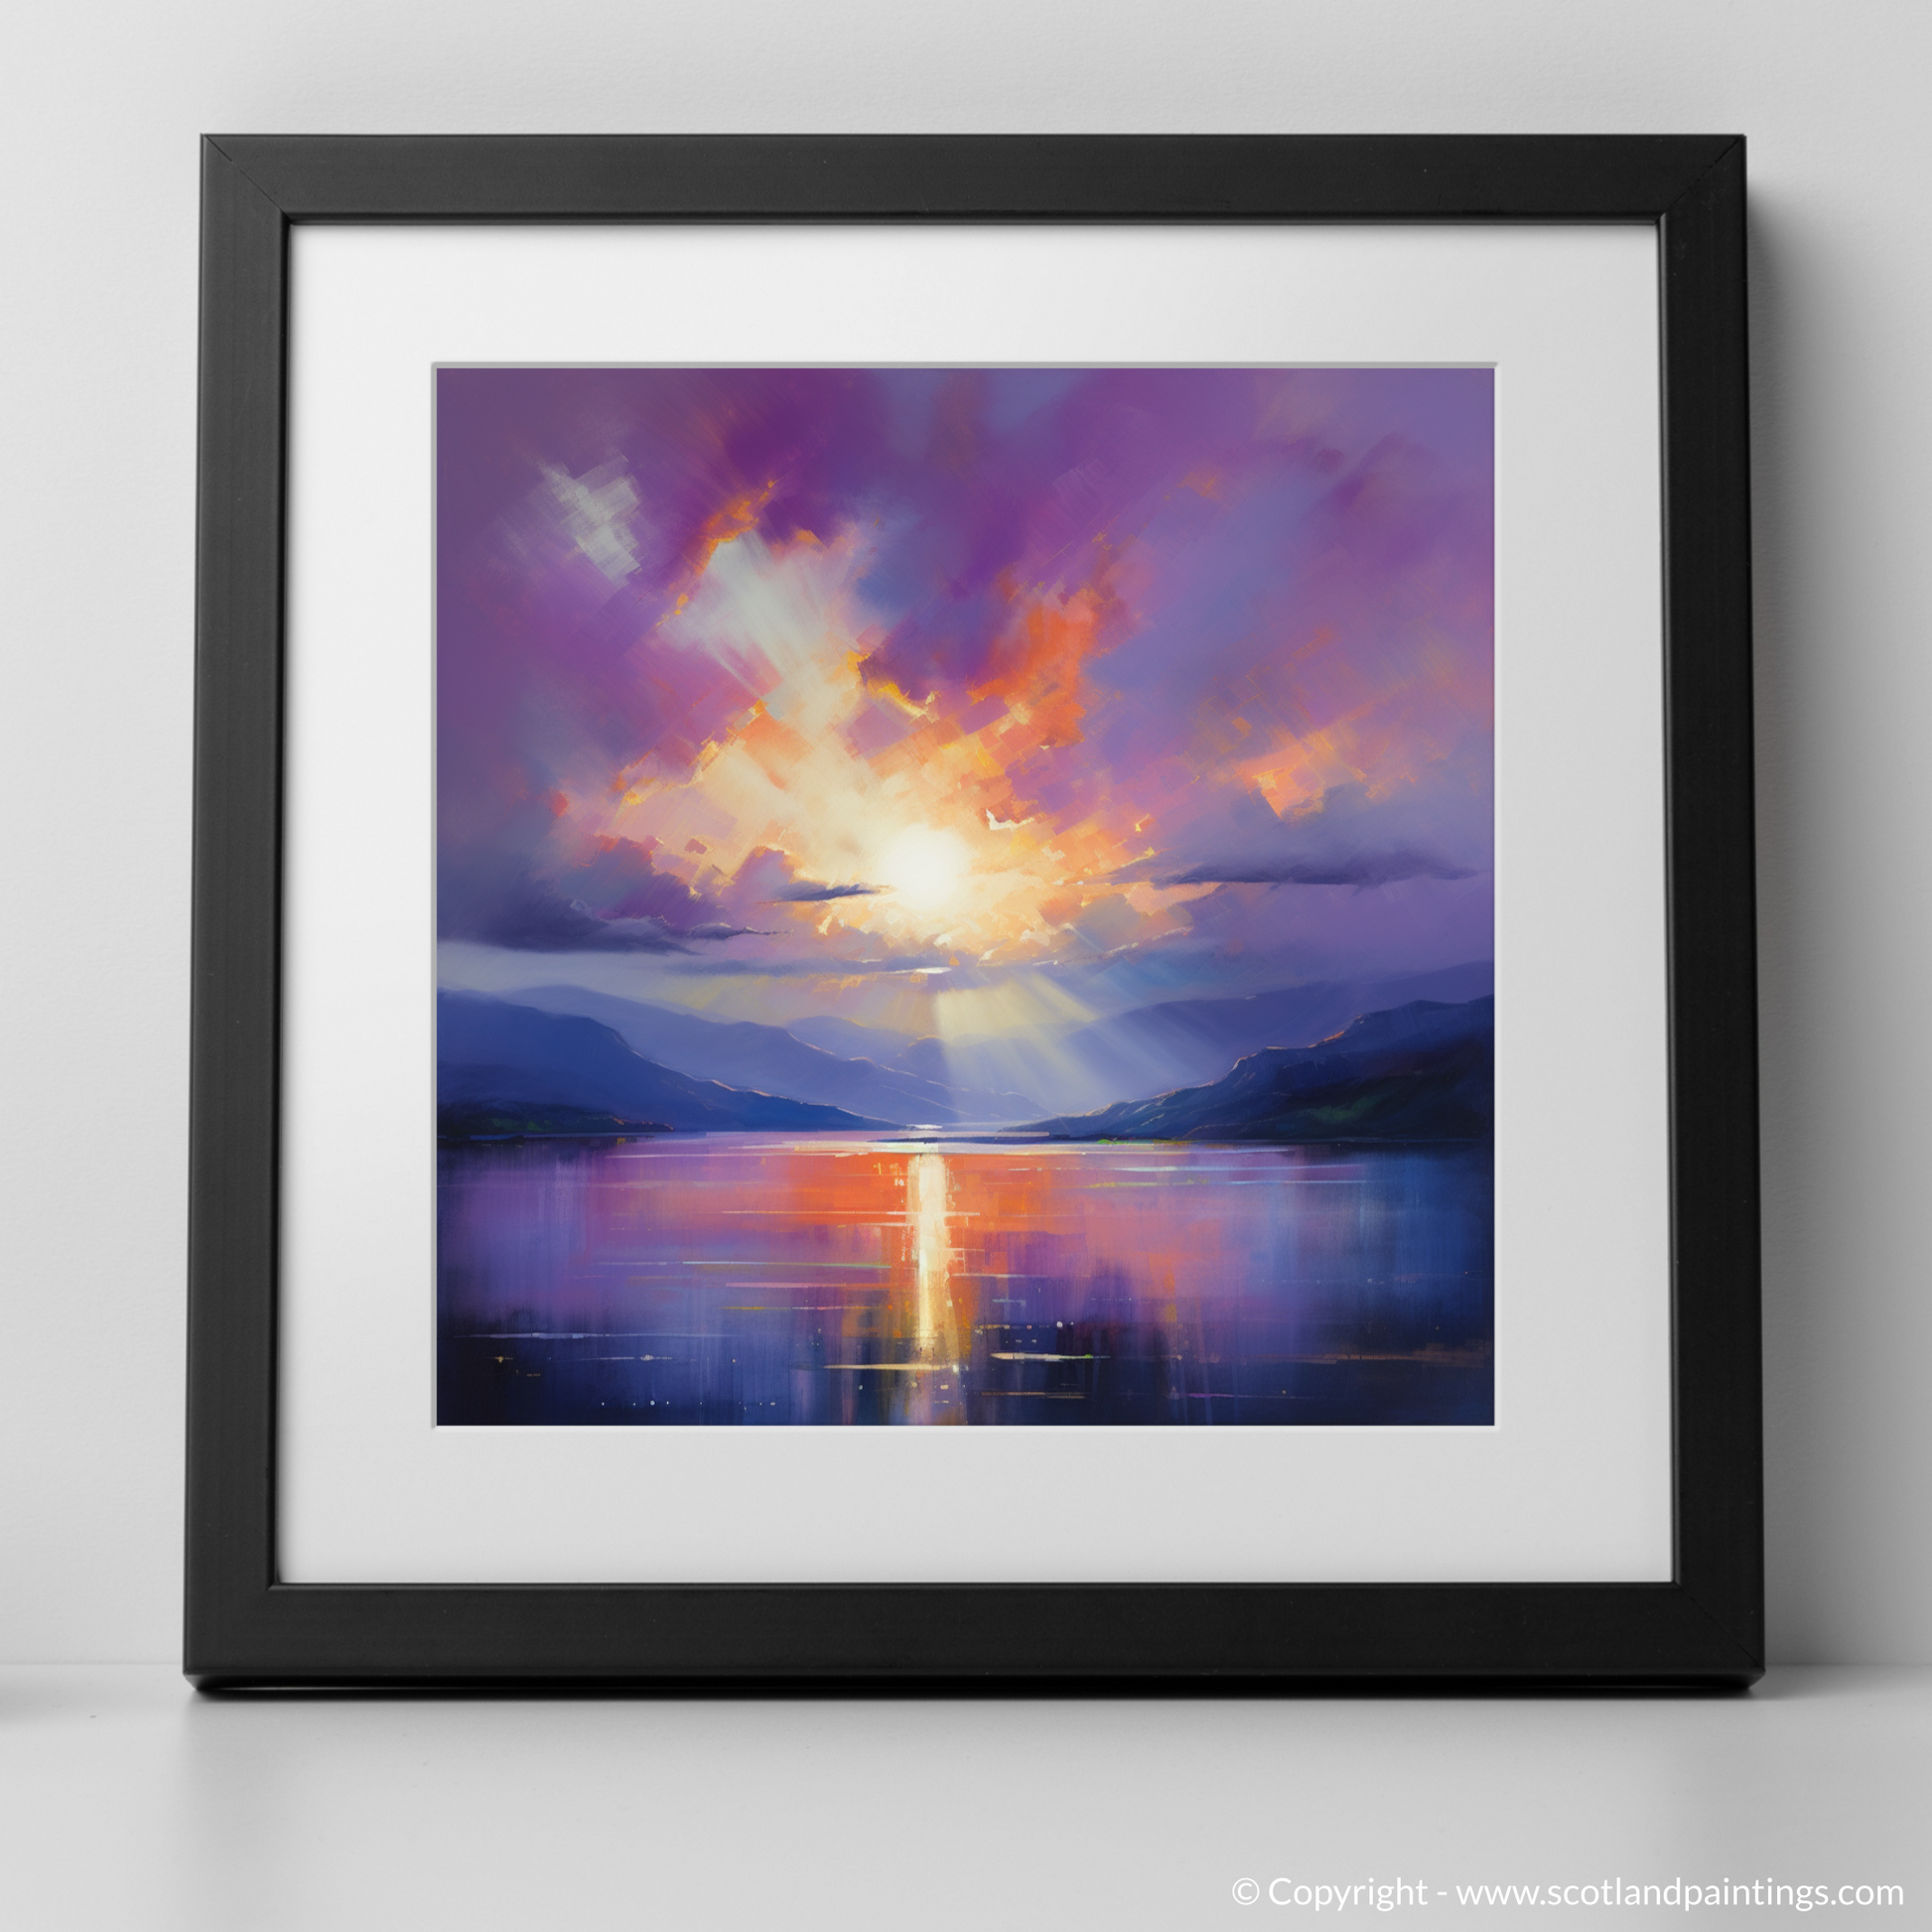 Art Print of Crepuscular rays above Loch Lomond with a black frame